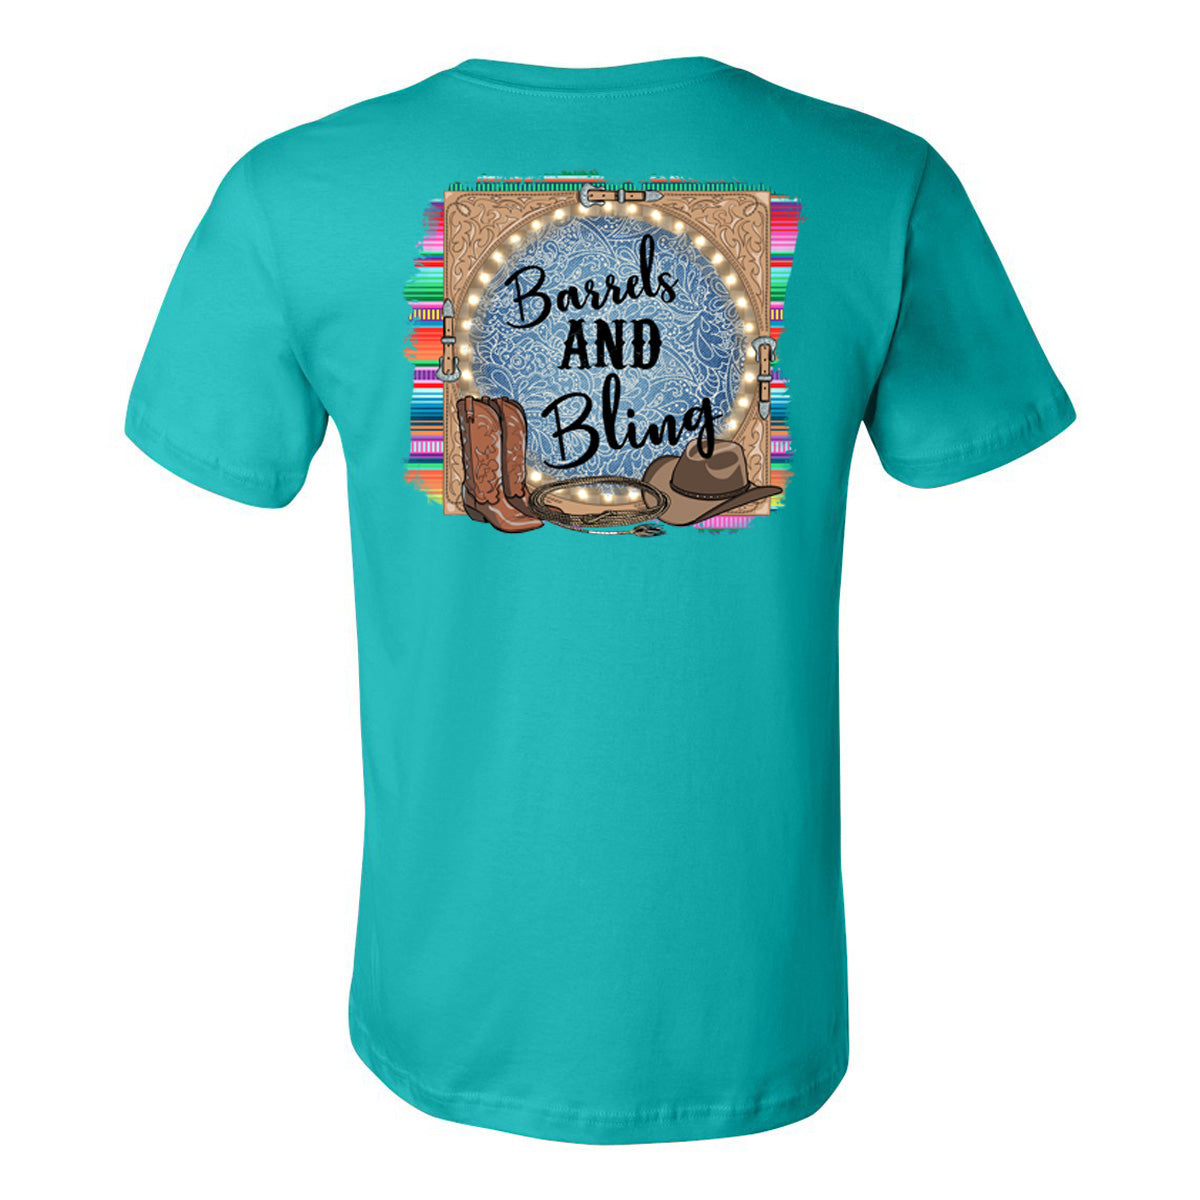 Barrels and Bling - Teal Short Sleeves Tee - Southern Grace Creations